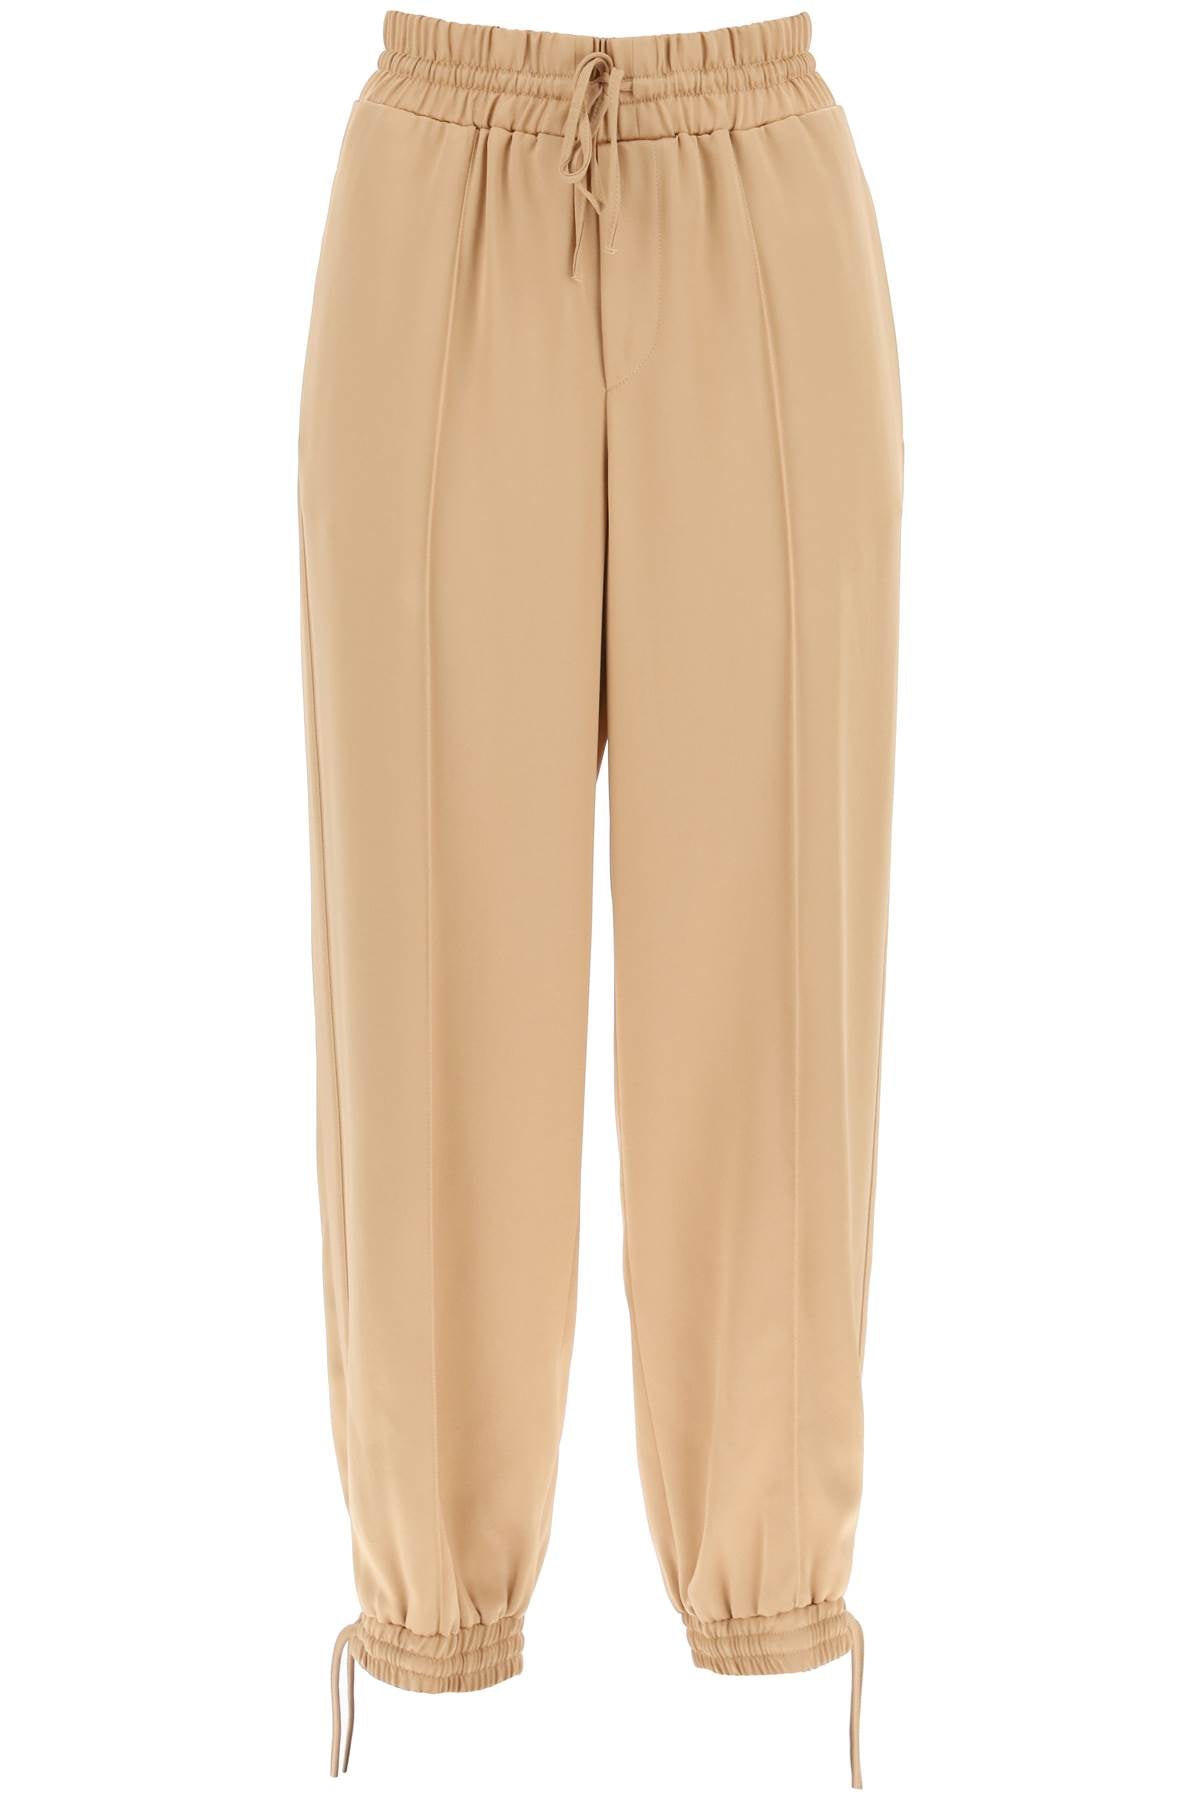 JIL SANDER Luxurious Satin Drawstring Pants for a Chic and Sporty Look